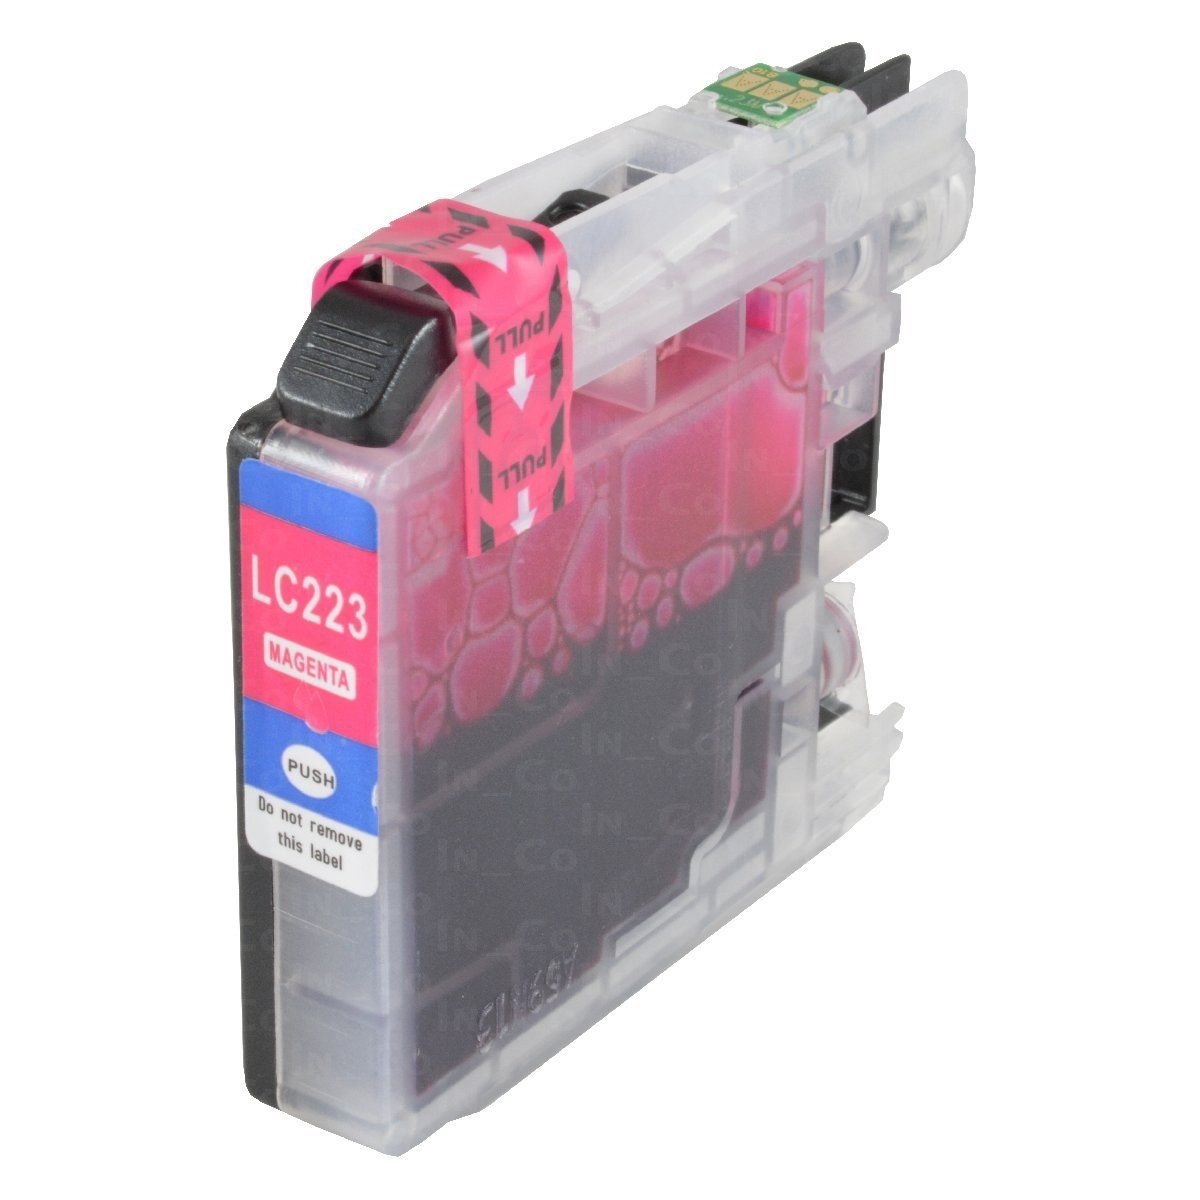 Brother LC-223M inktcartridge rood (compatible)